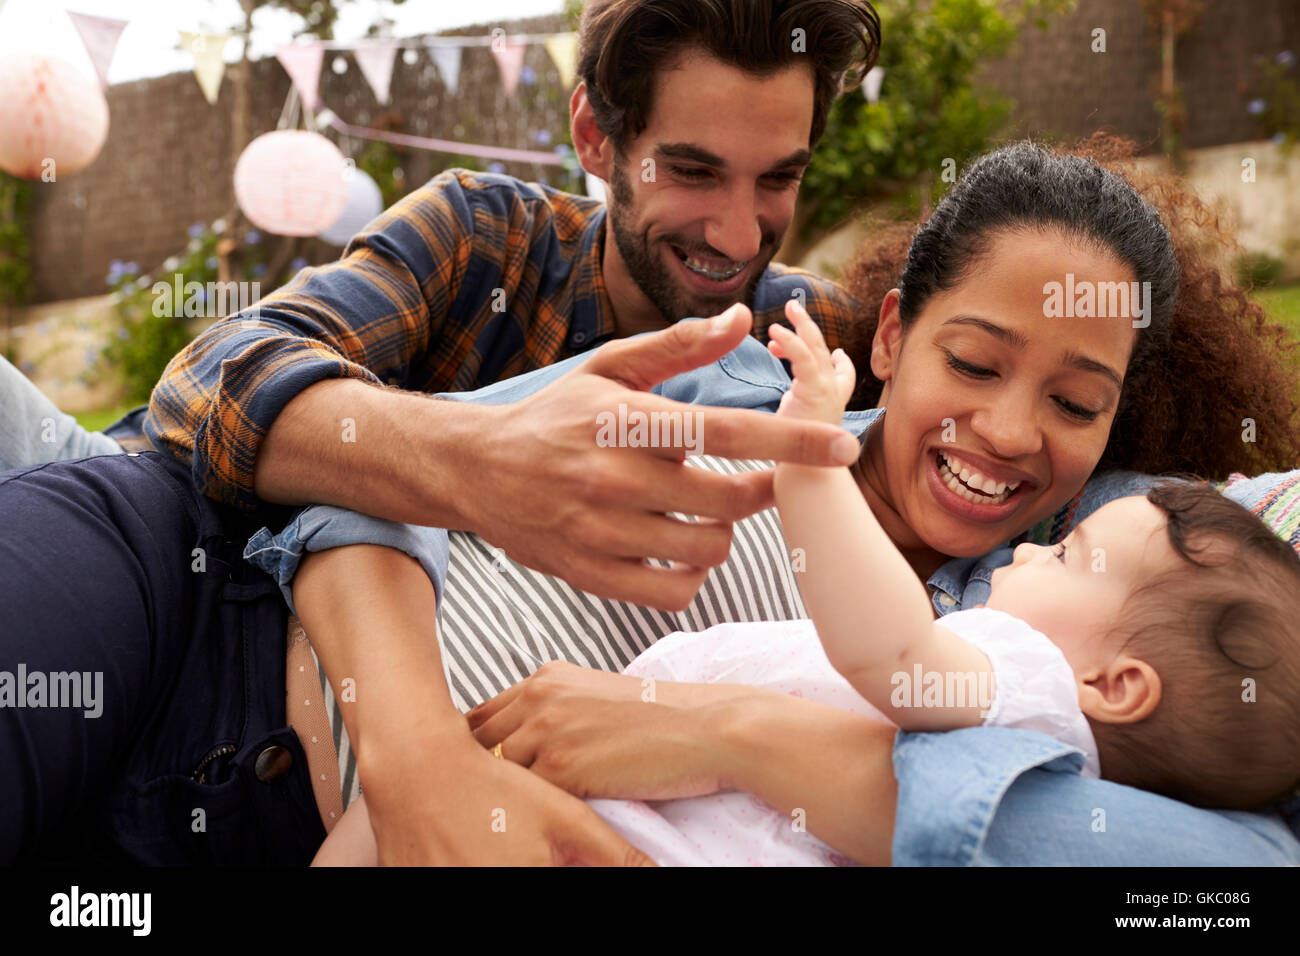 Family With Baby Playing On Rug In Garden Together Stock Photo